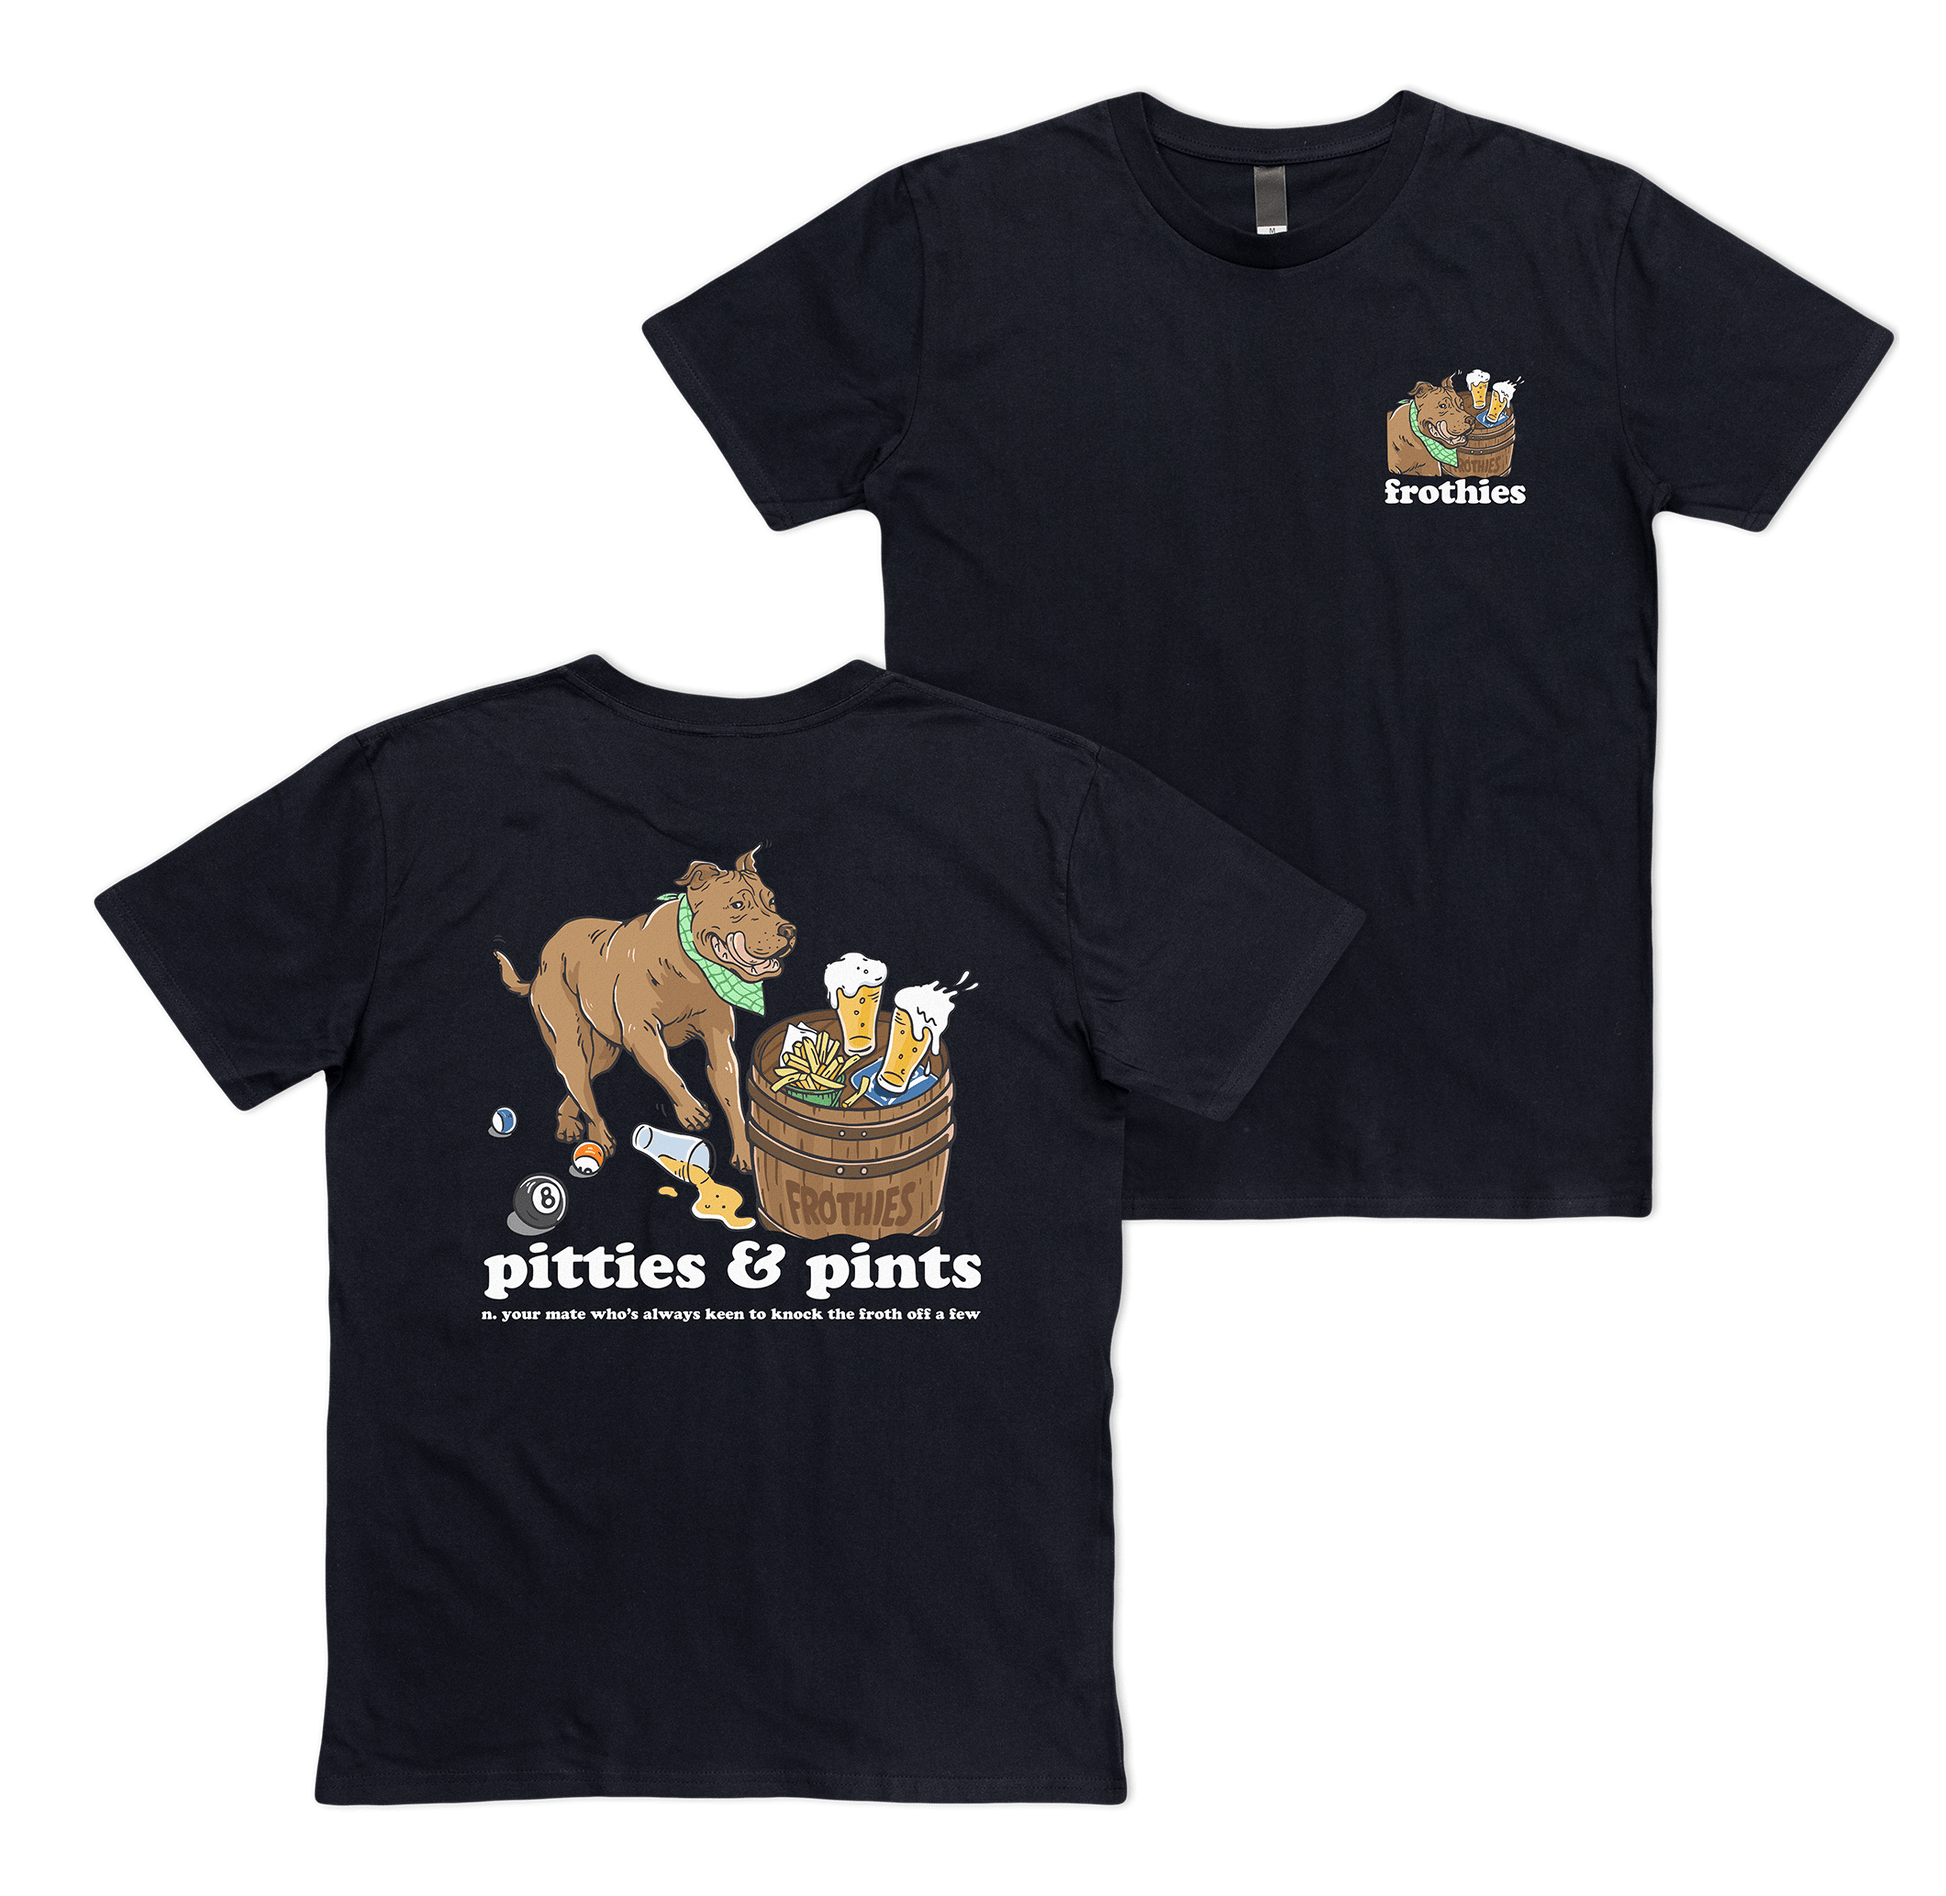 Pitties & Pints Tee T-Shirt Frothies